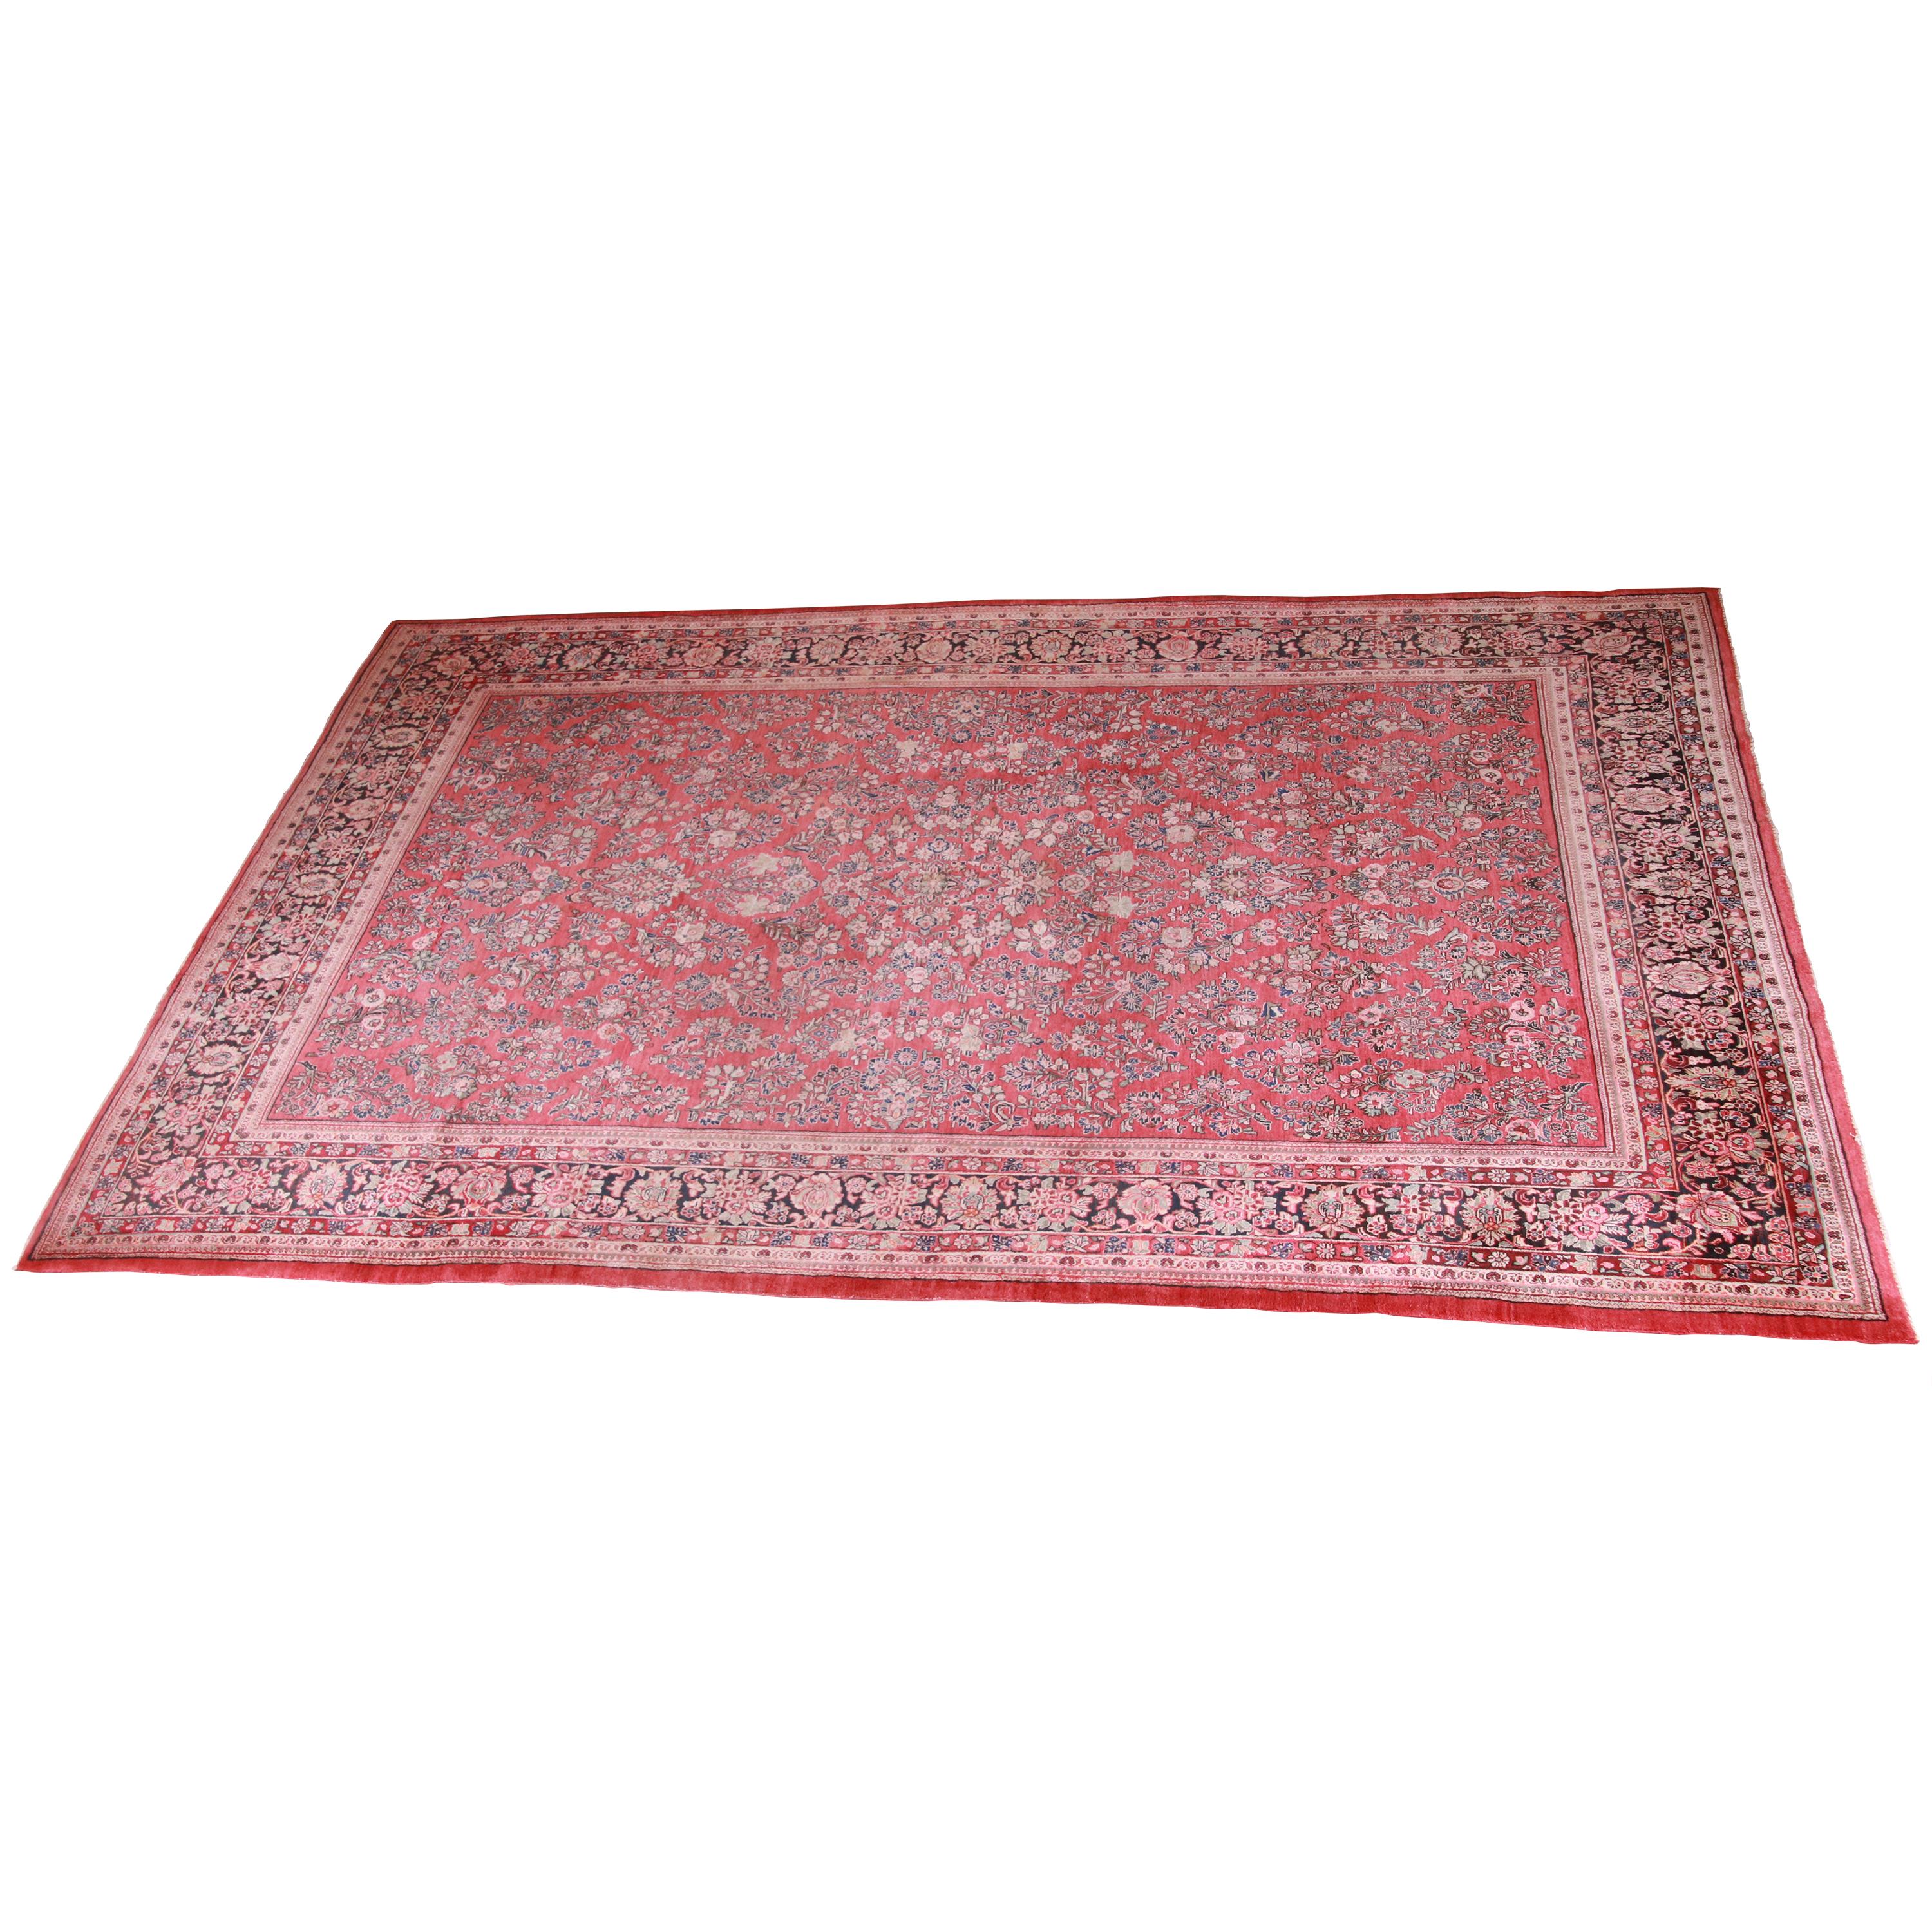 Semi-Antique Hand-Knotted Persian Sarouk Room Size Rug, circa 1940s